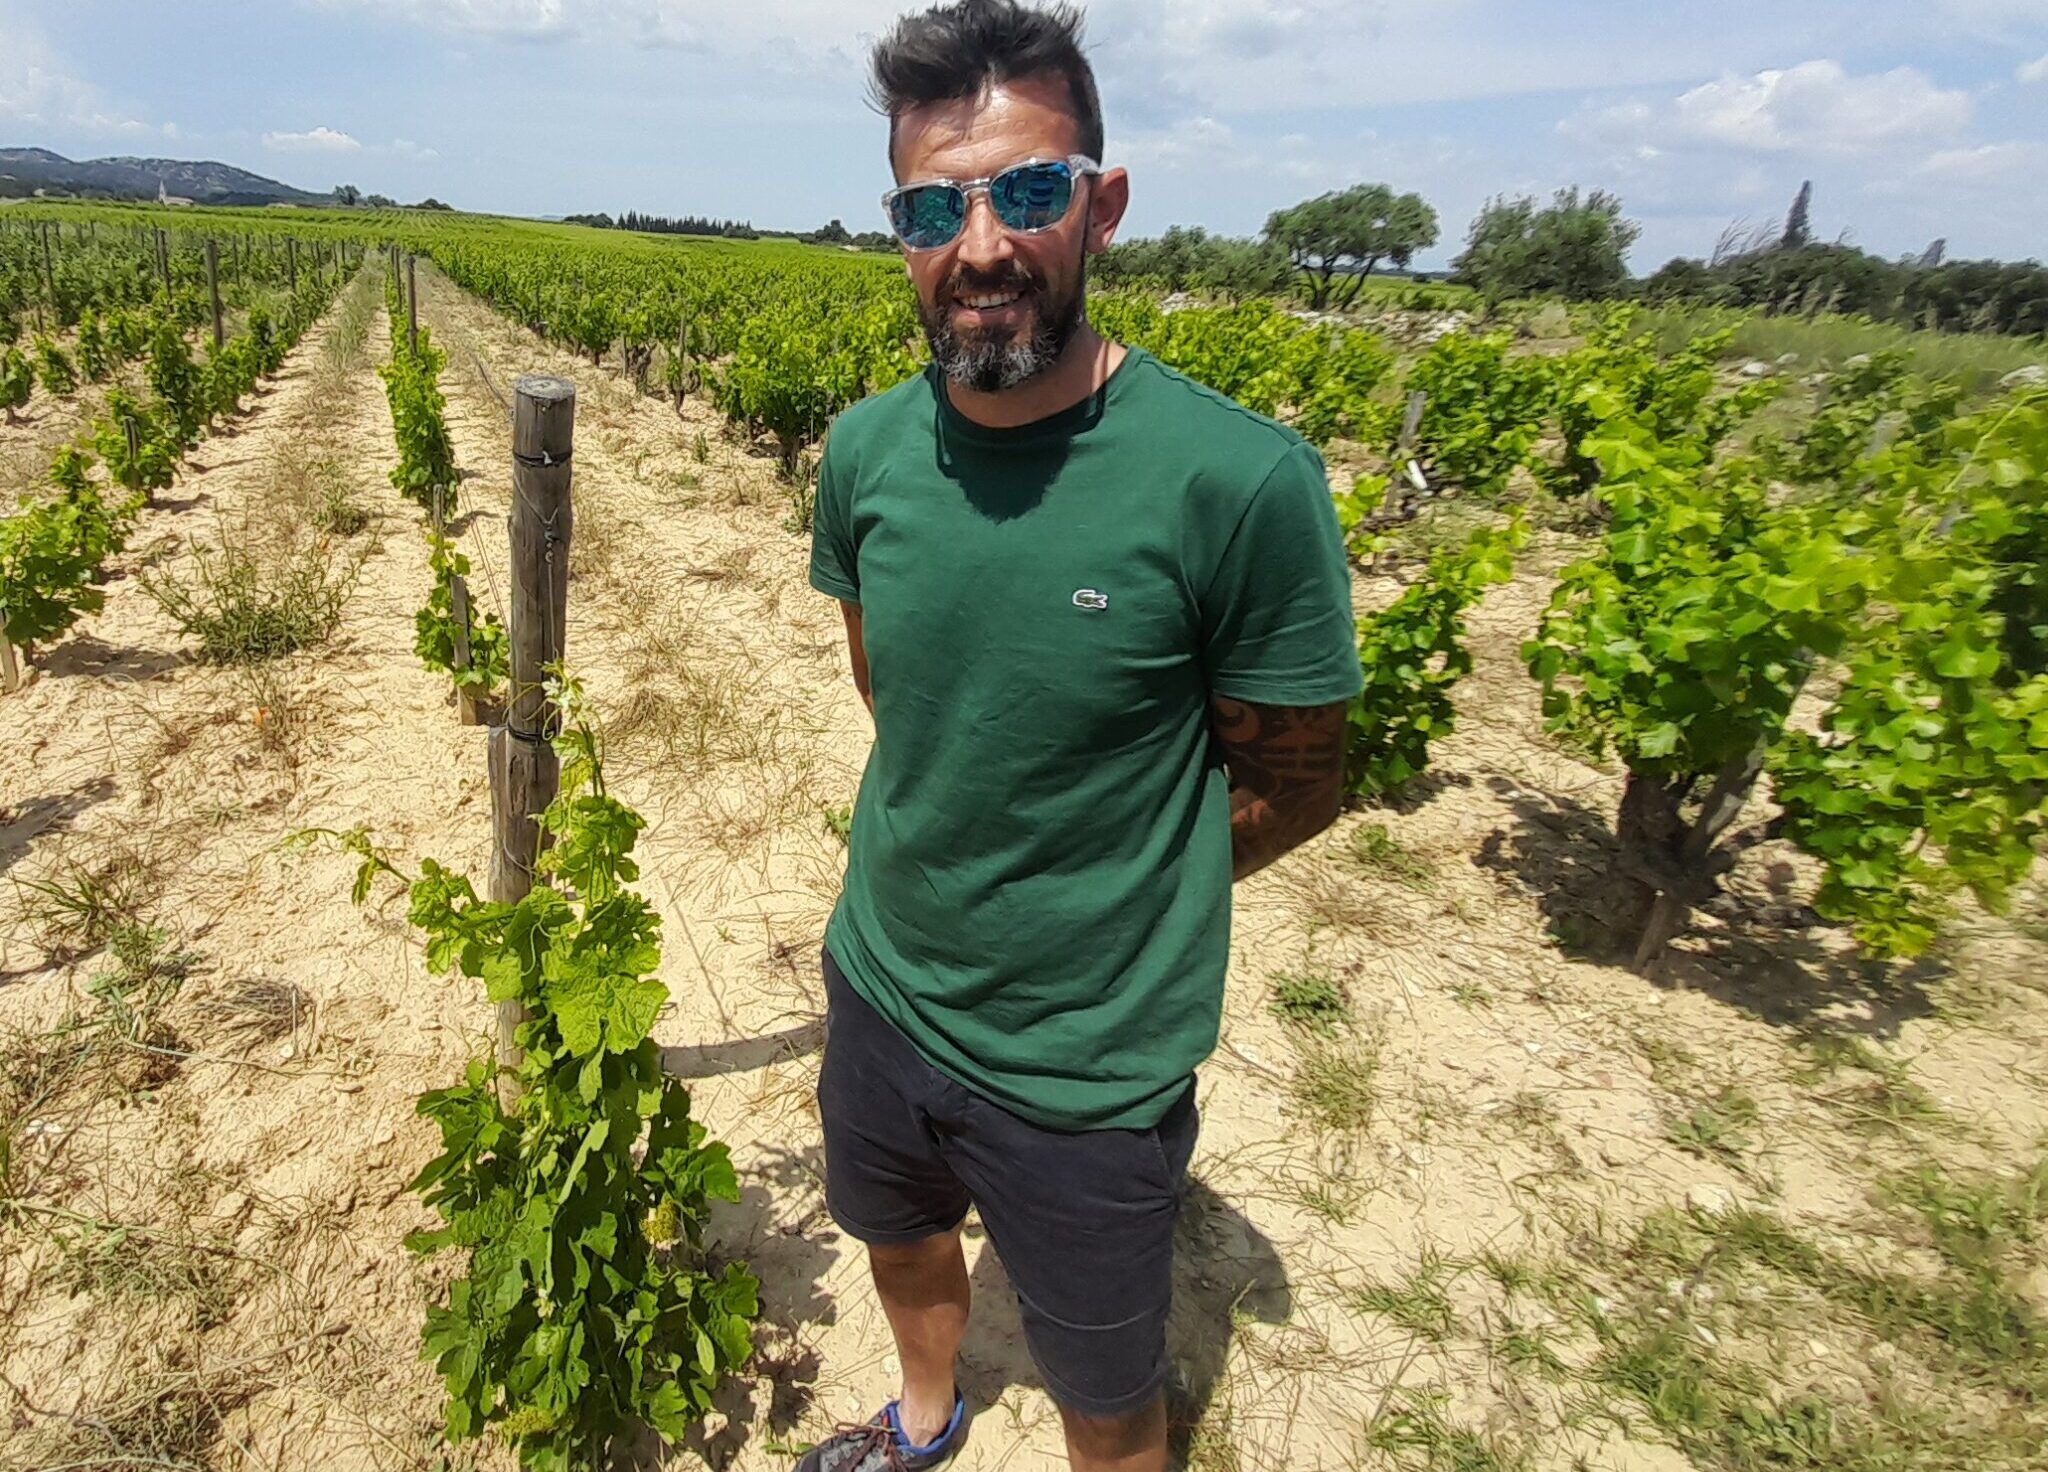 Finding value and balance in the wines of the lesser-known Rhône